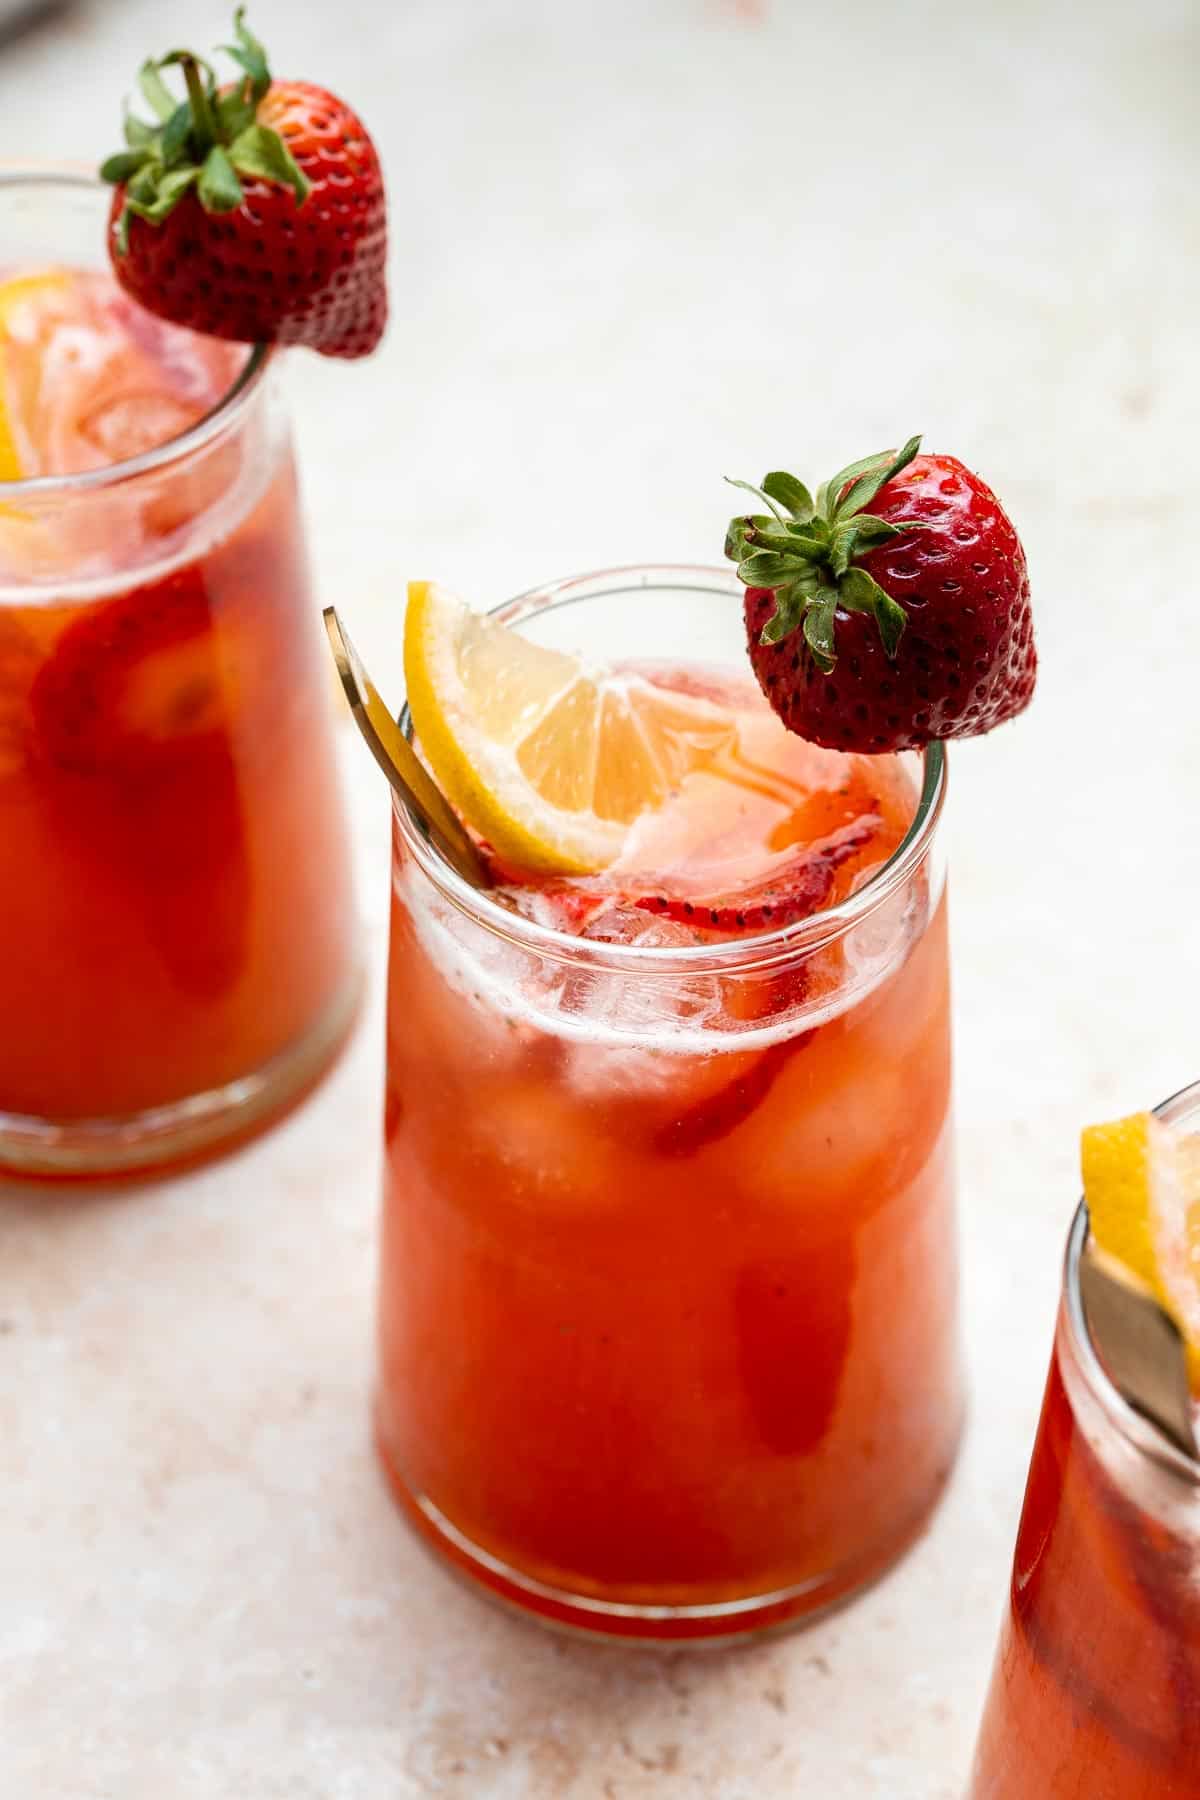 Homemade strawberry lemonade is refreshing, flavorful, and easy to make. This sparkling summer drink is loaded with fresh strawberries and lemon. | aheadofthyme.com